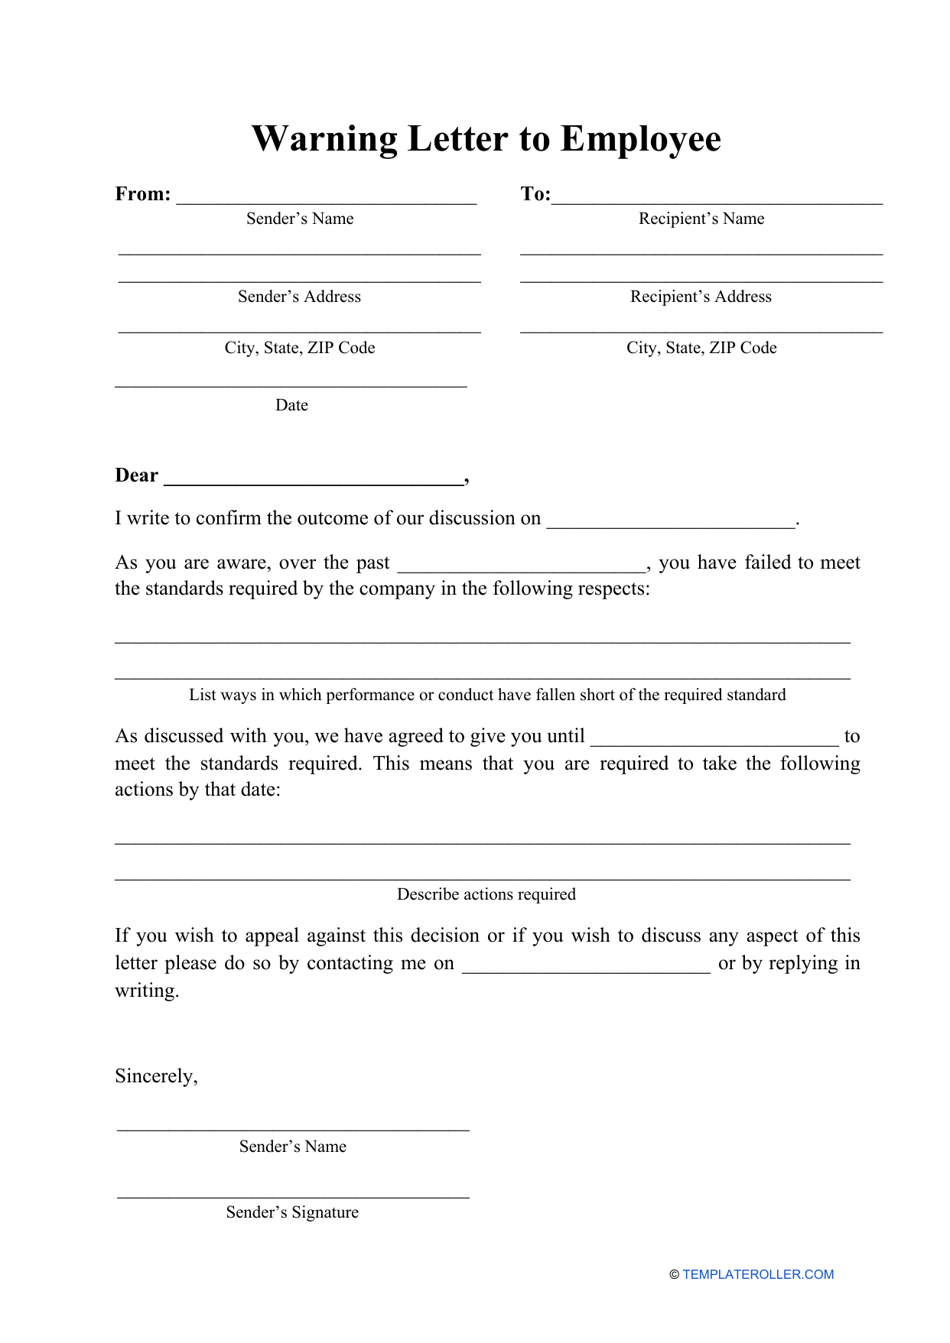 warning-letter-to-employee-template-fill-out-sign-online-and